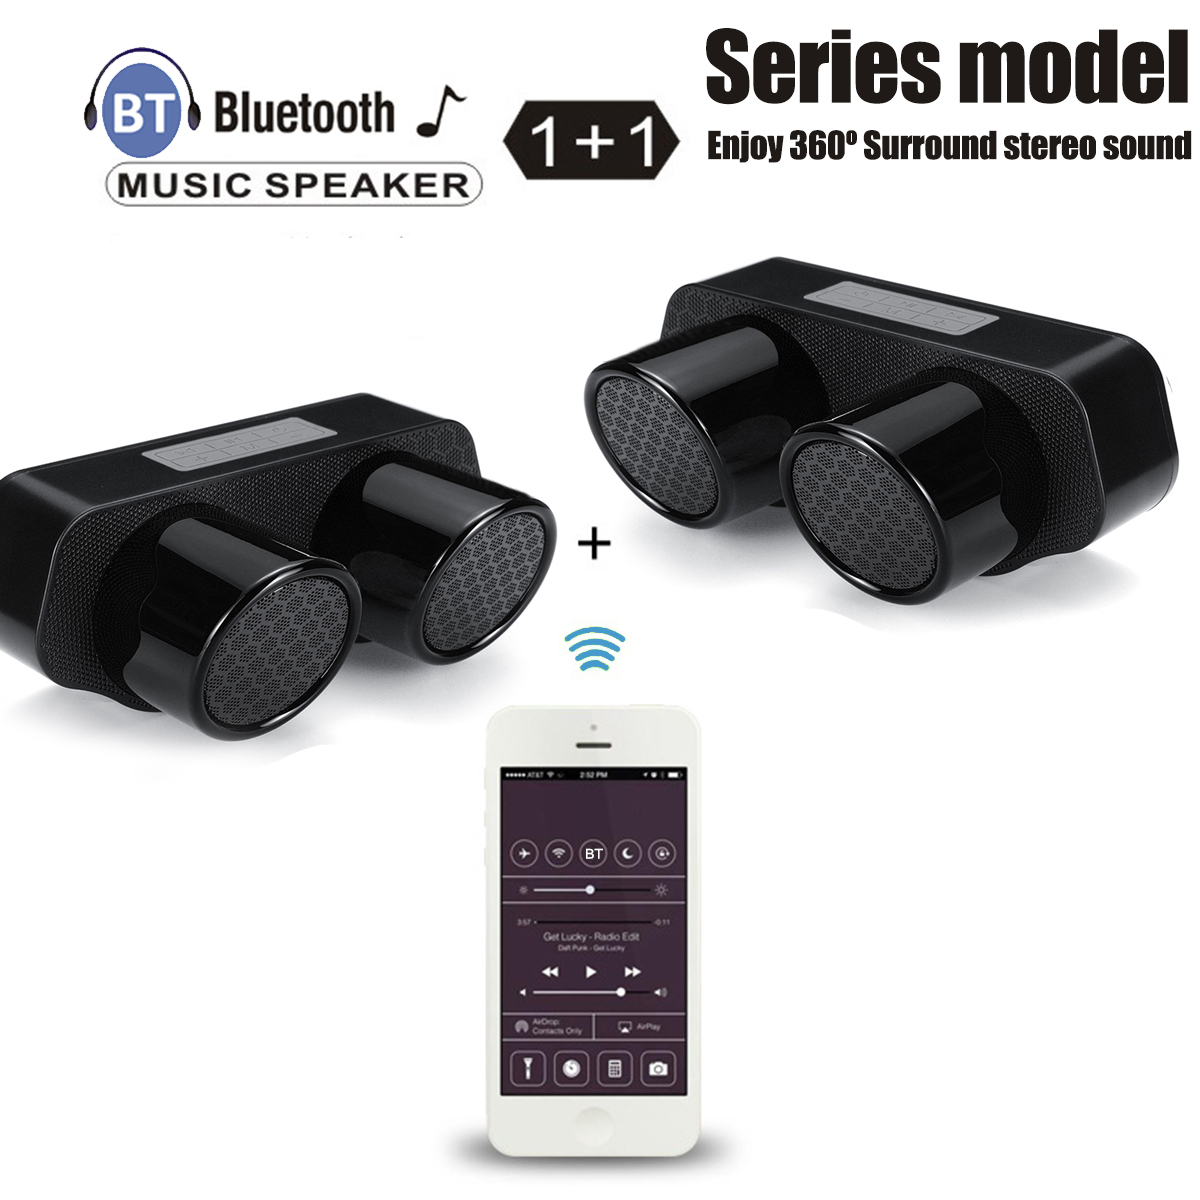 Rechargeable-Portable-Wireless-bluetooth-Speaker-FM-Radio-TF-Card-CSR50-Super-Bass-Sound-Stereo-Spea-1427727-2